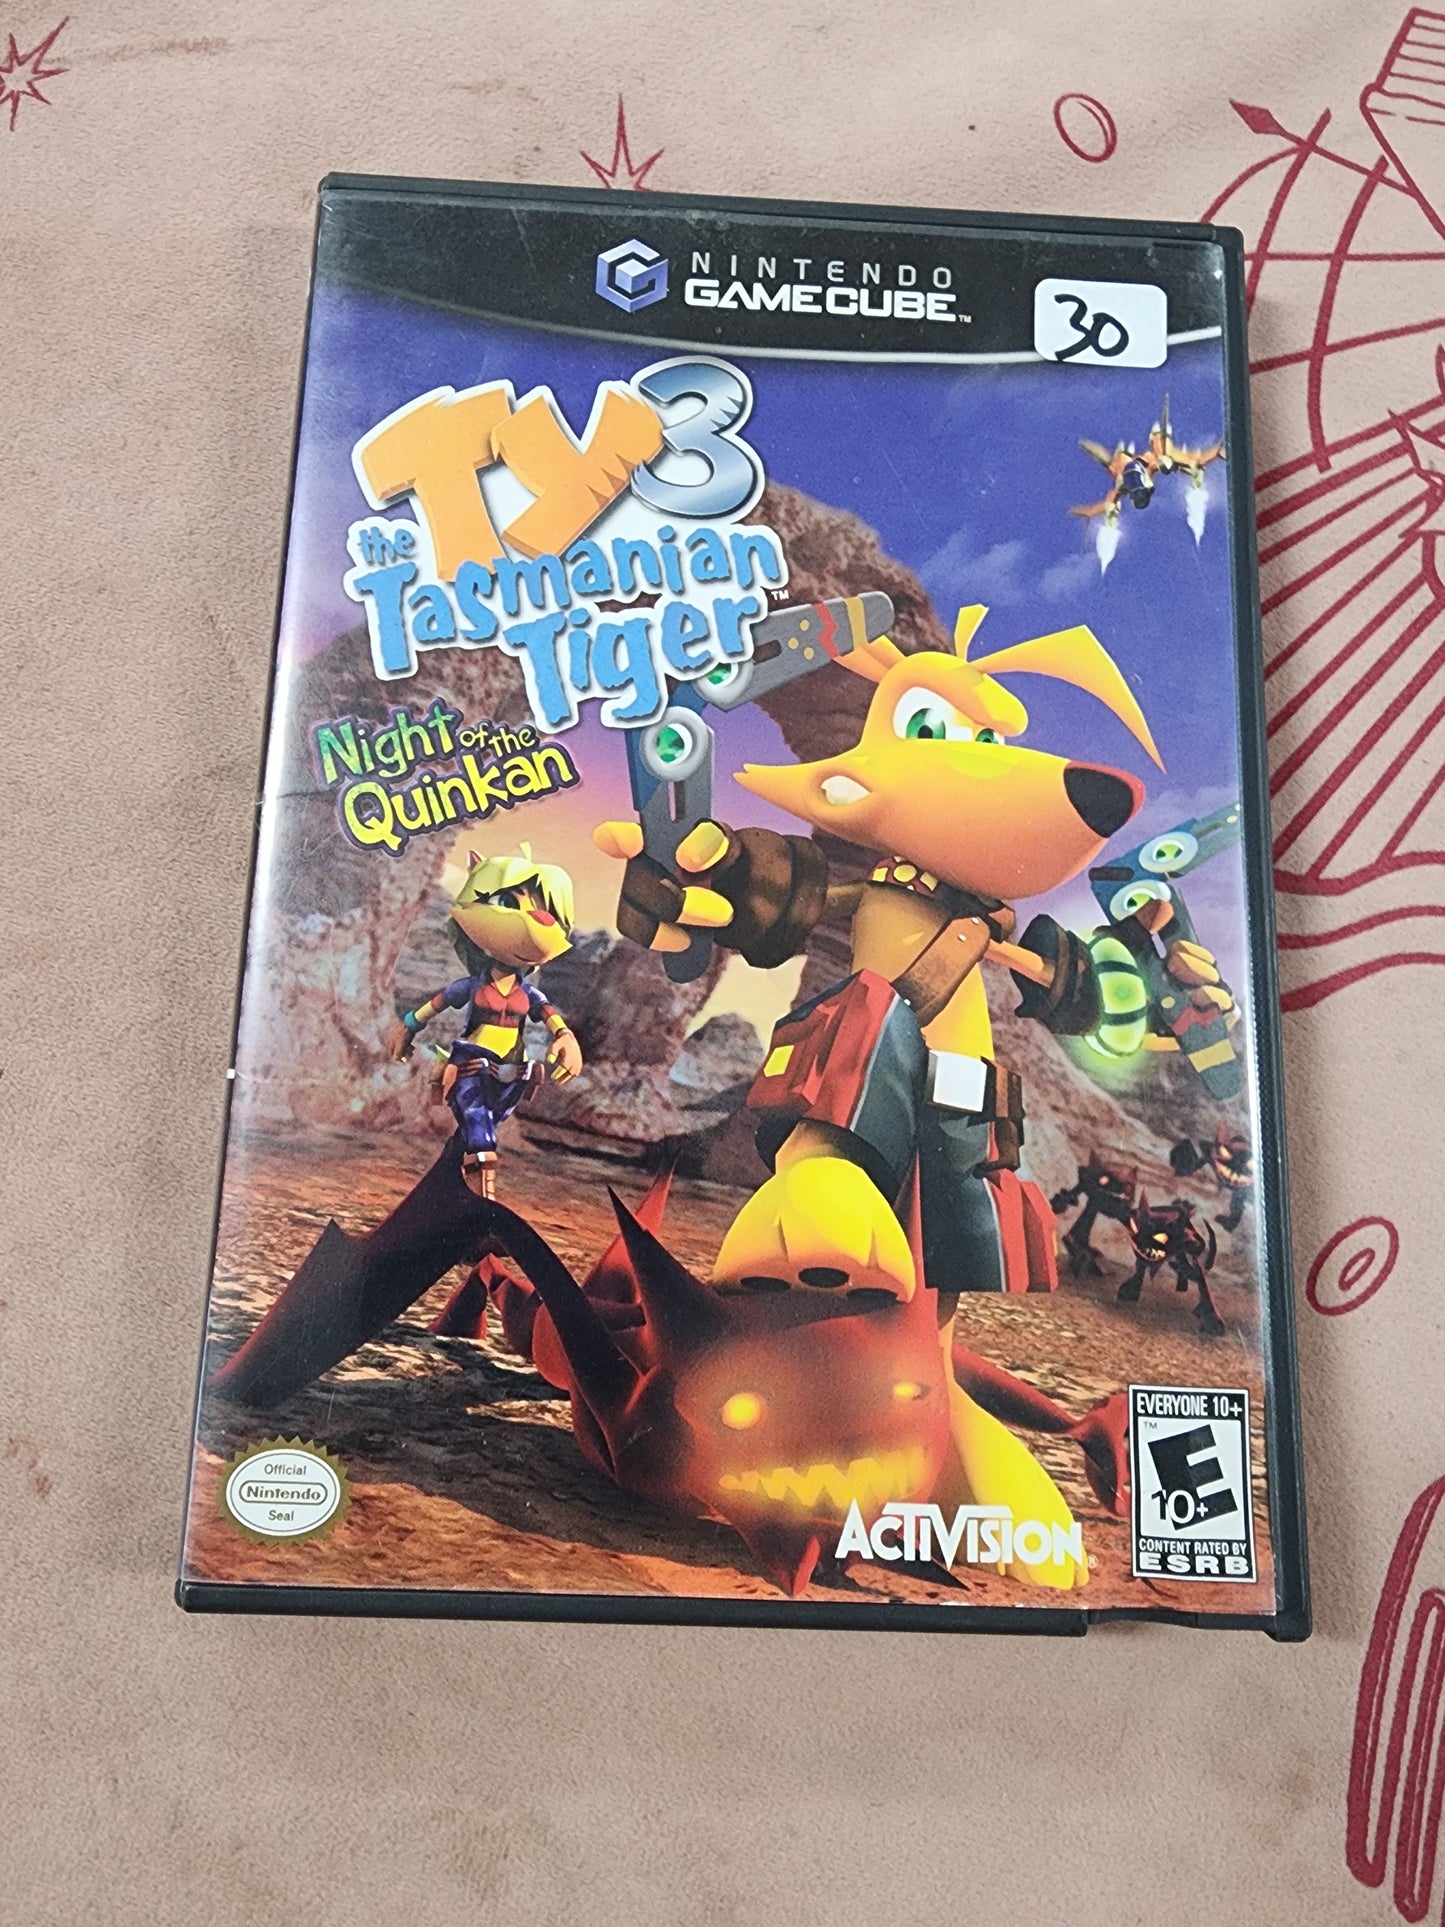 Ty3 The Tasmanian Tiger Night of the Quinkan gamecube missing manual